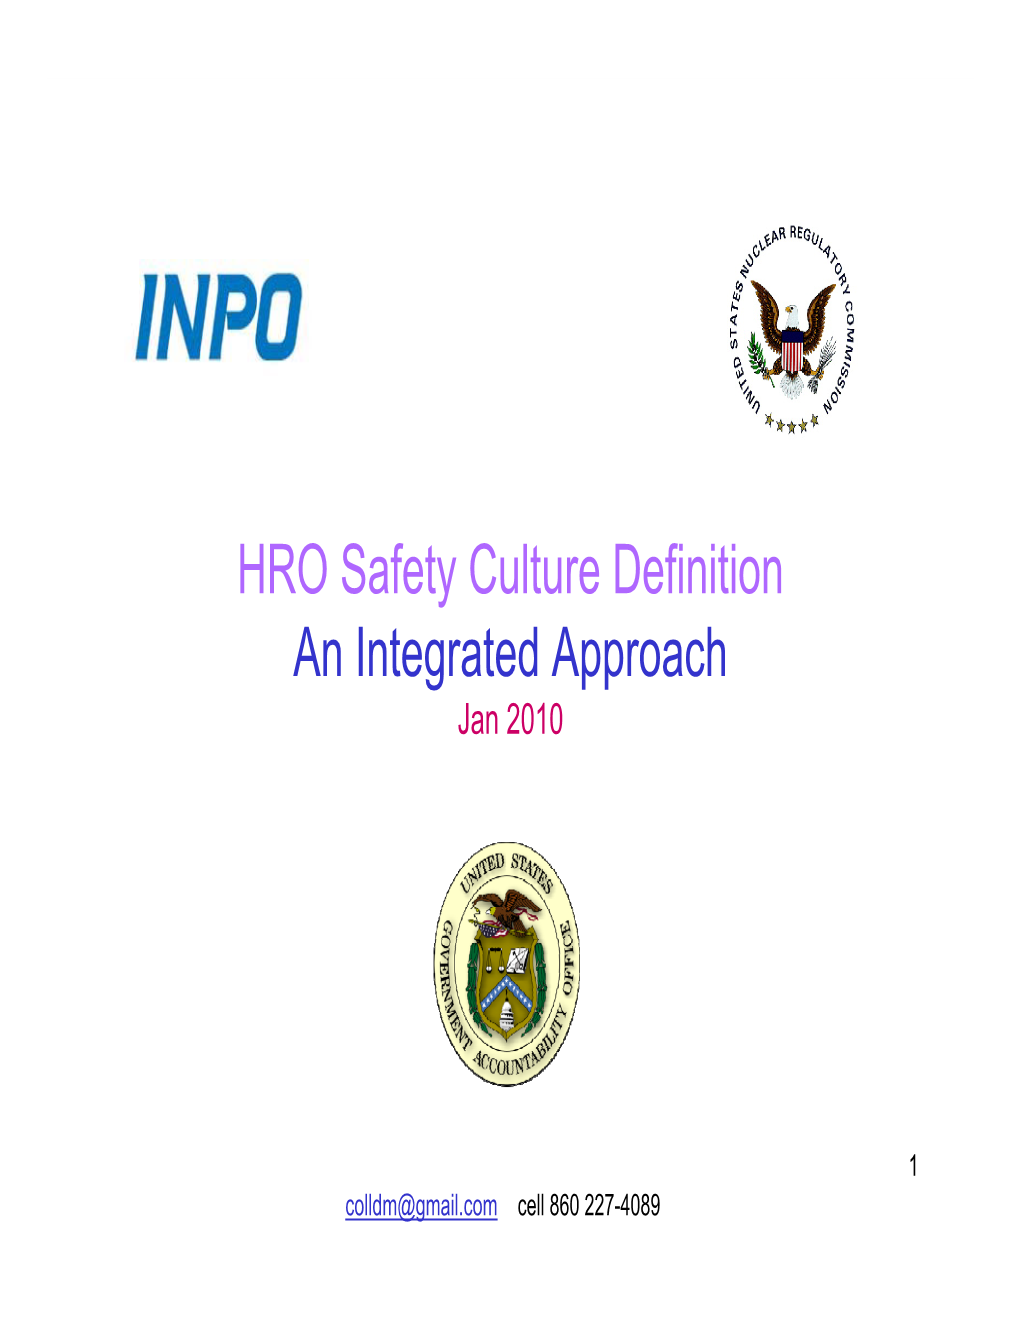 HRO Safety Culture Definition an Integrated Approach Jan 2010